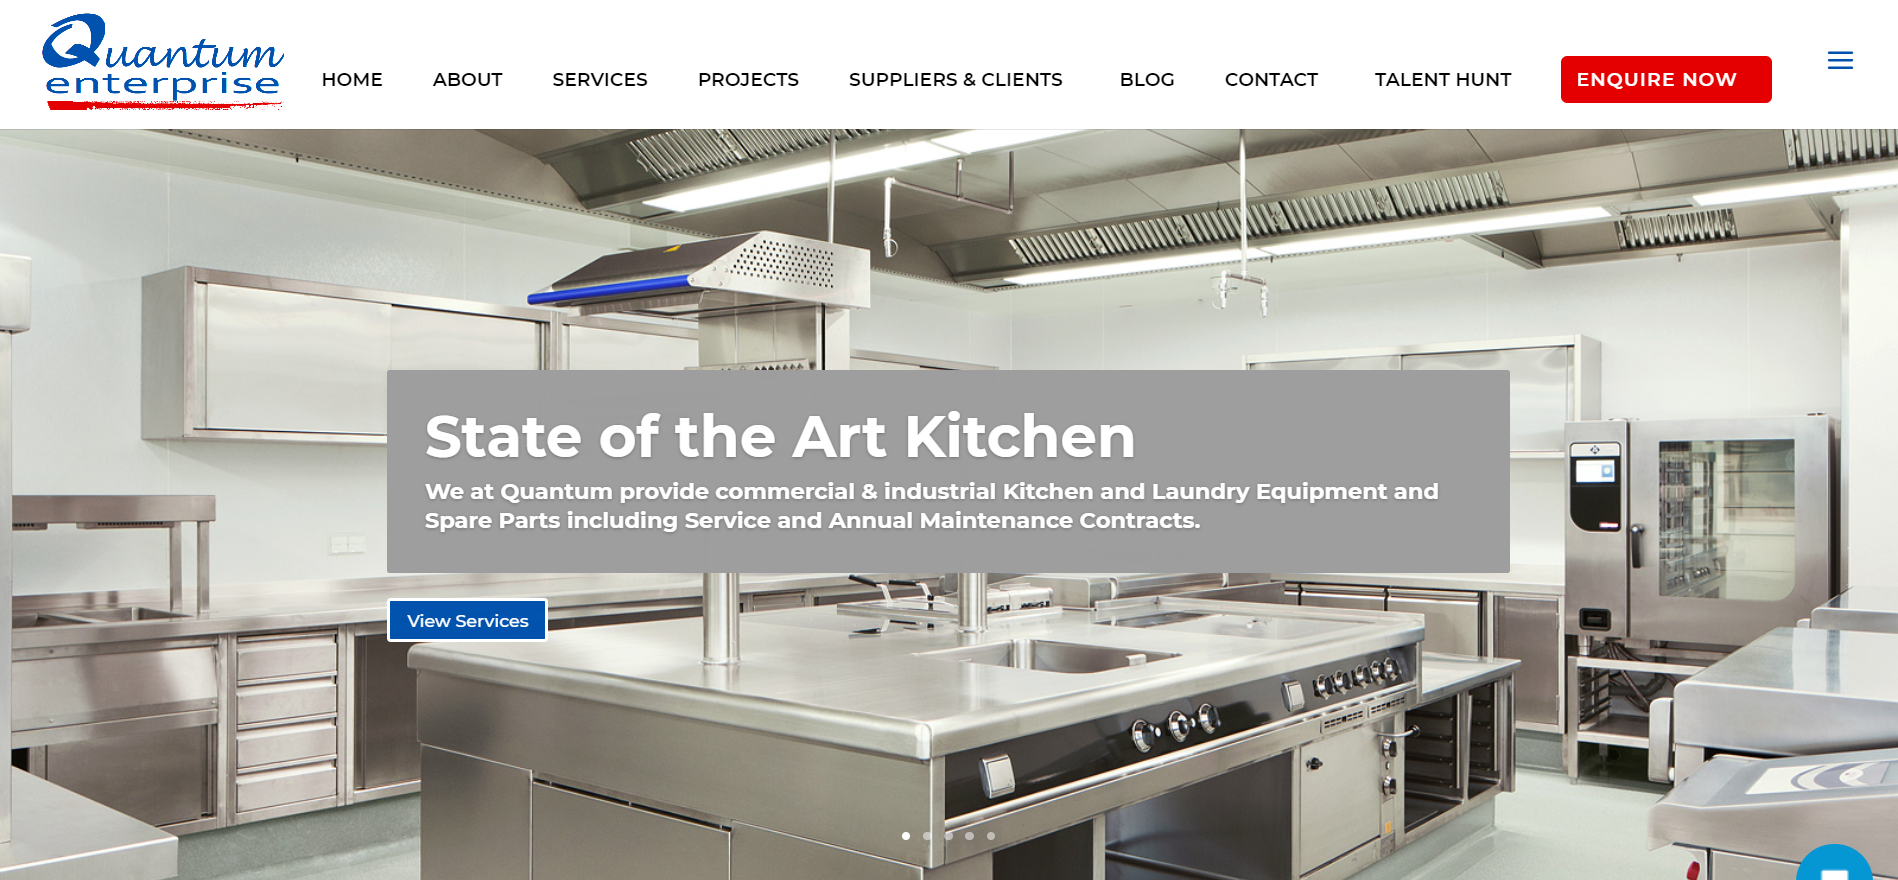 Commercial Kitchen & Catering, Laundry, Cold Rooms & Refrigeration Equipment